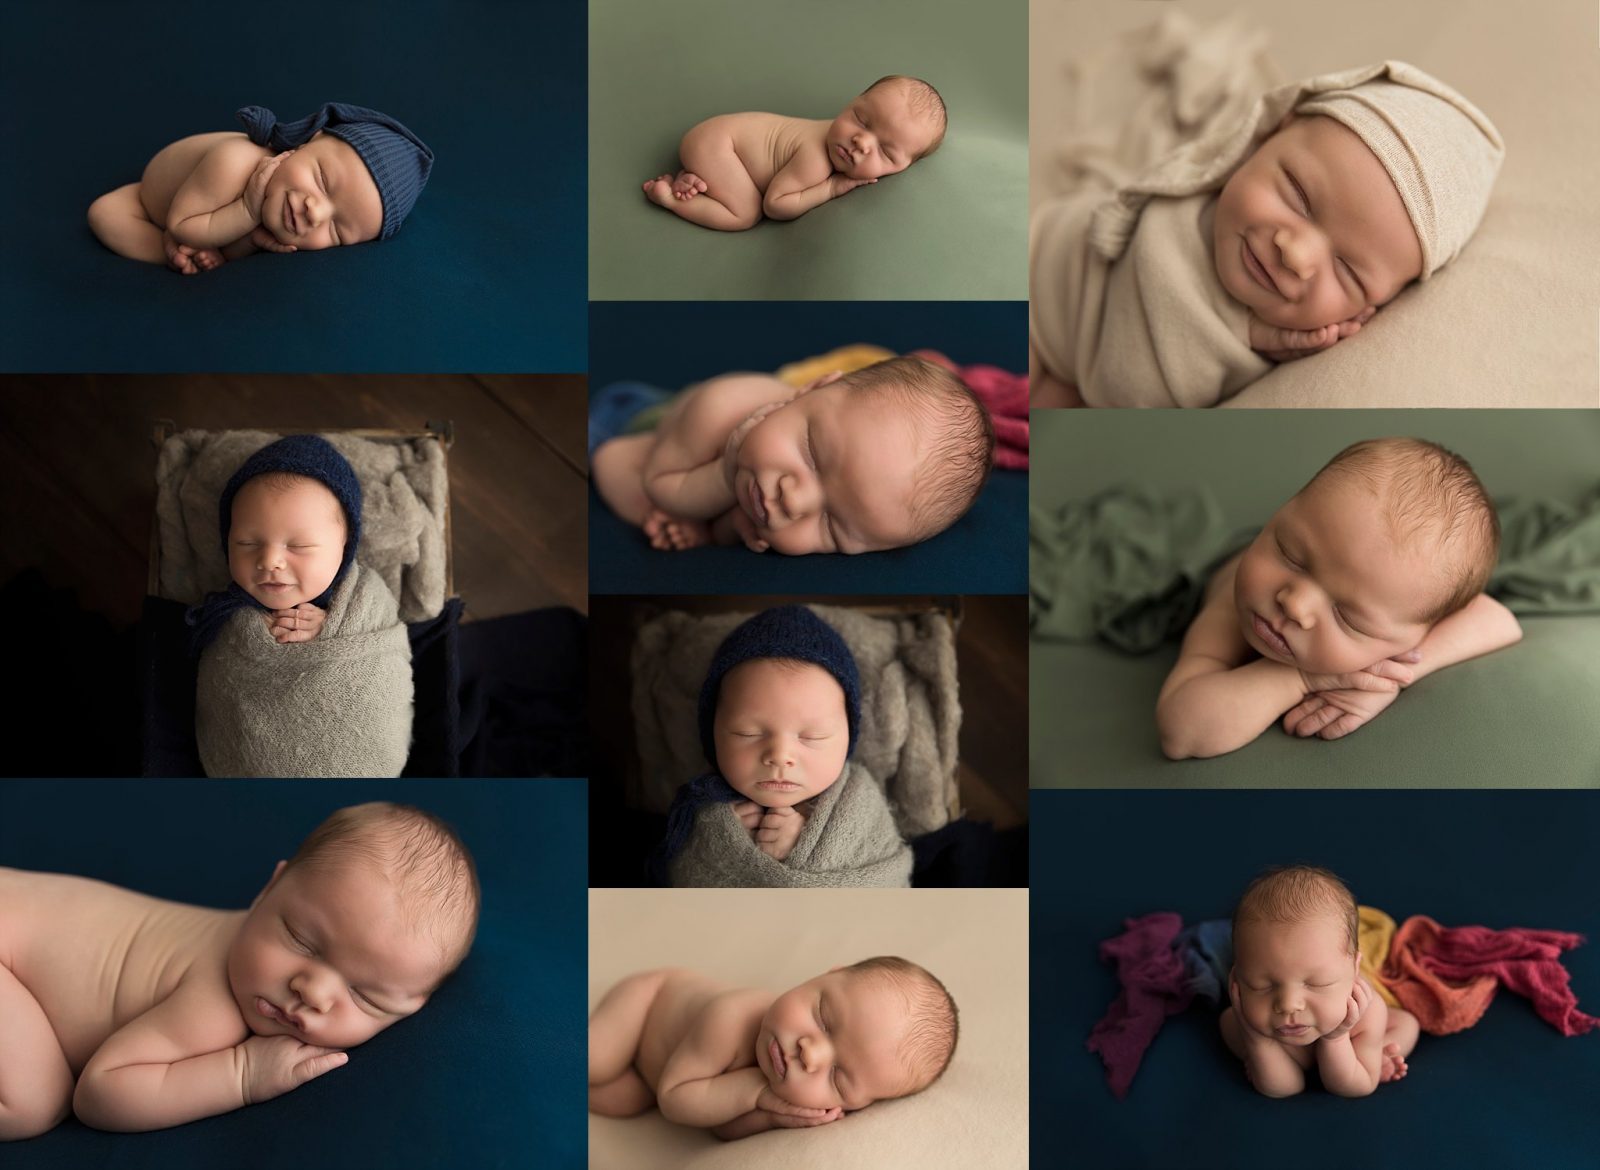 Baby Jaxon Phoenix, by and Photography Brittany Arizona Moncrieff Newborn Photographer Family, Captured Maternity in Newborn Photography Arizona Phoenix, - Simply